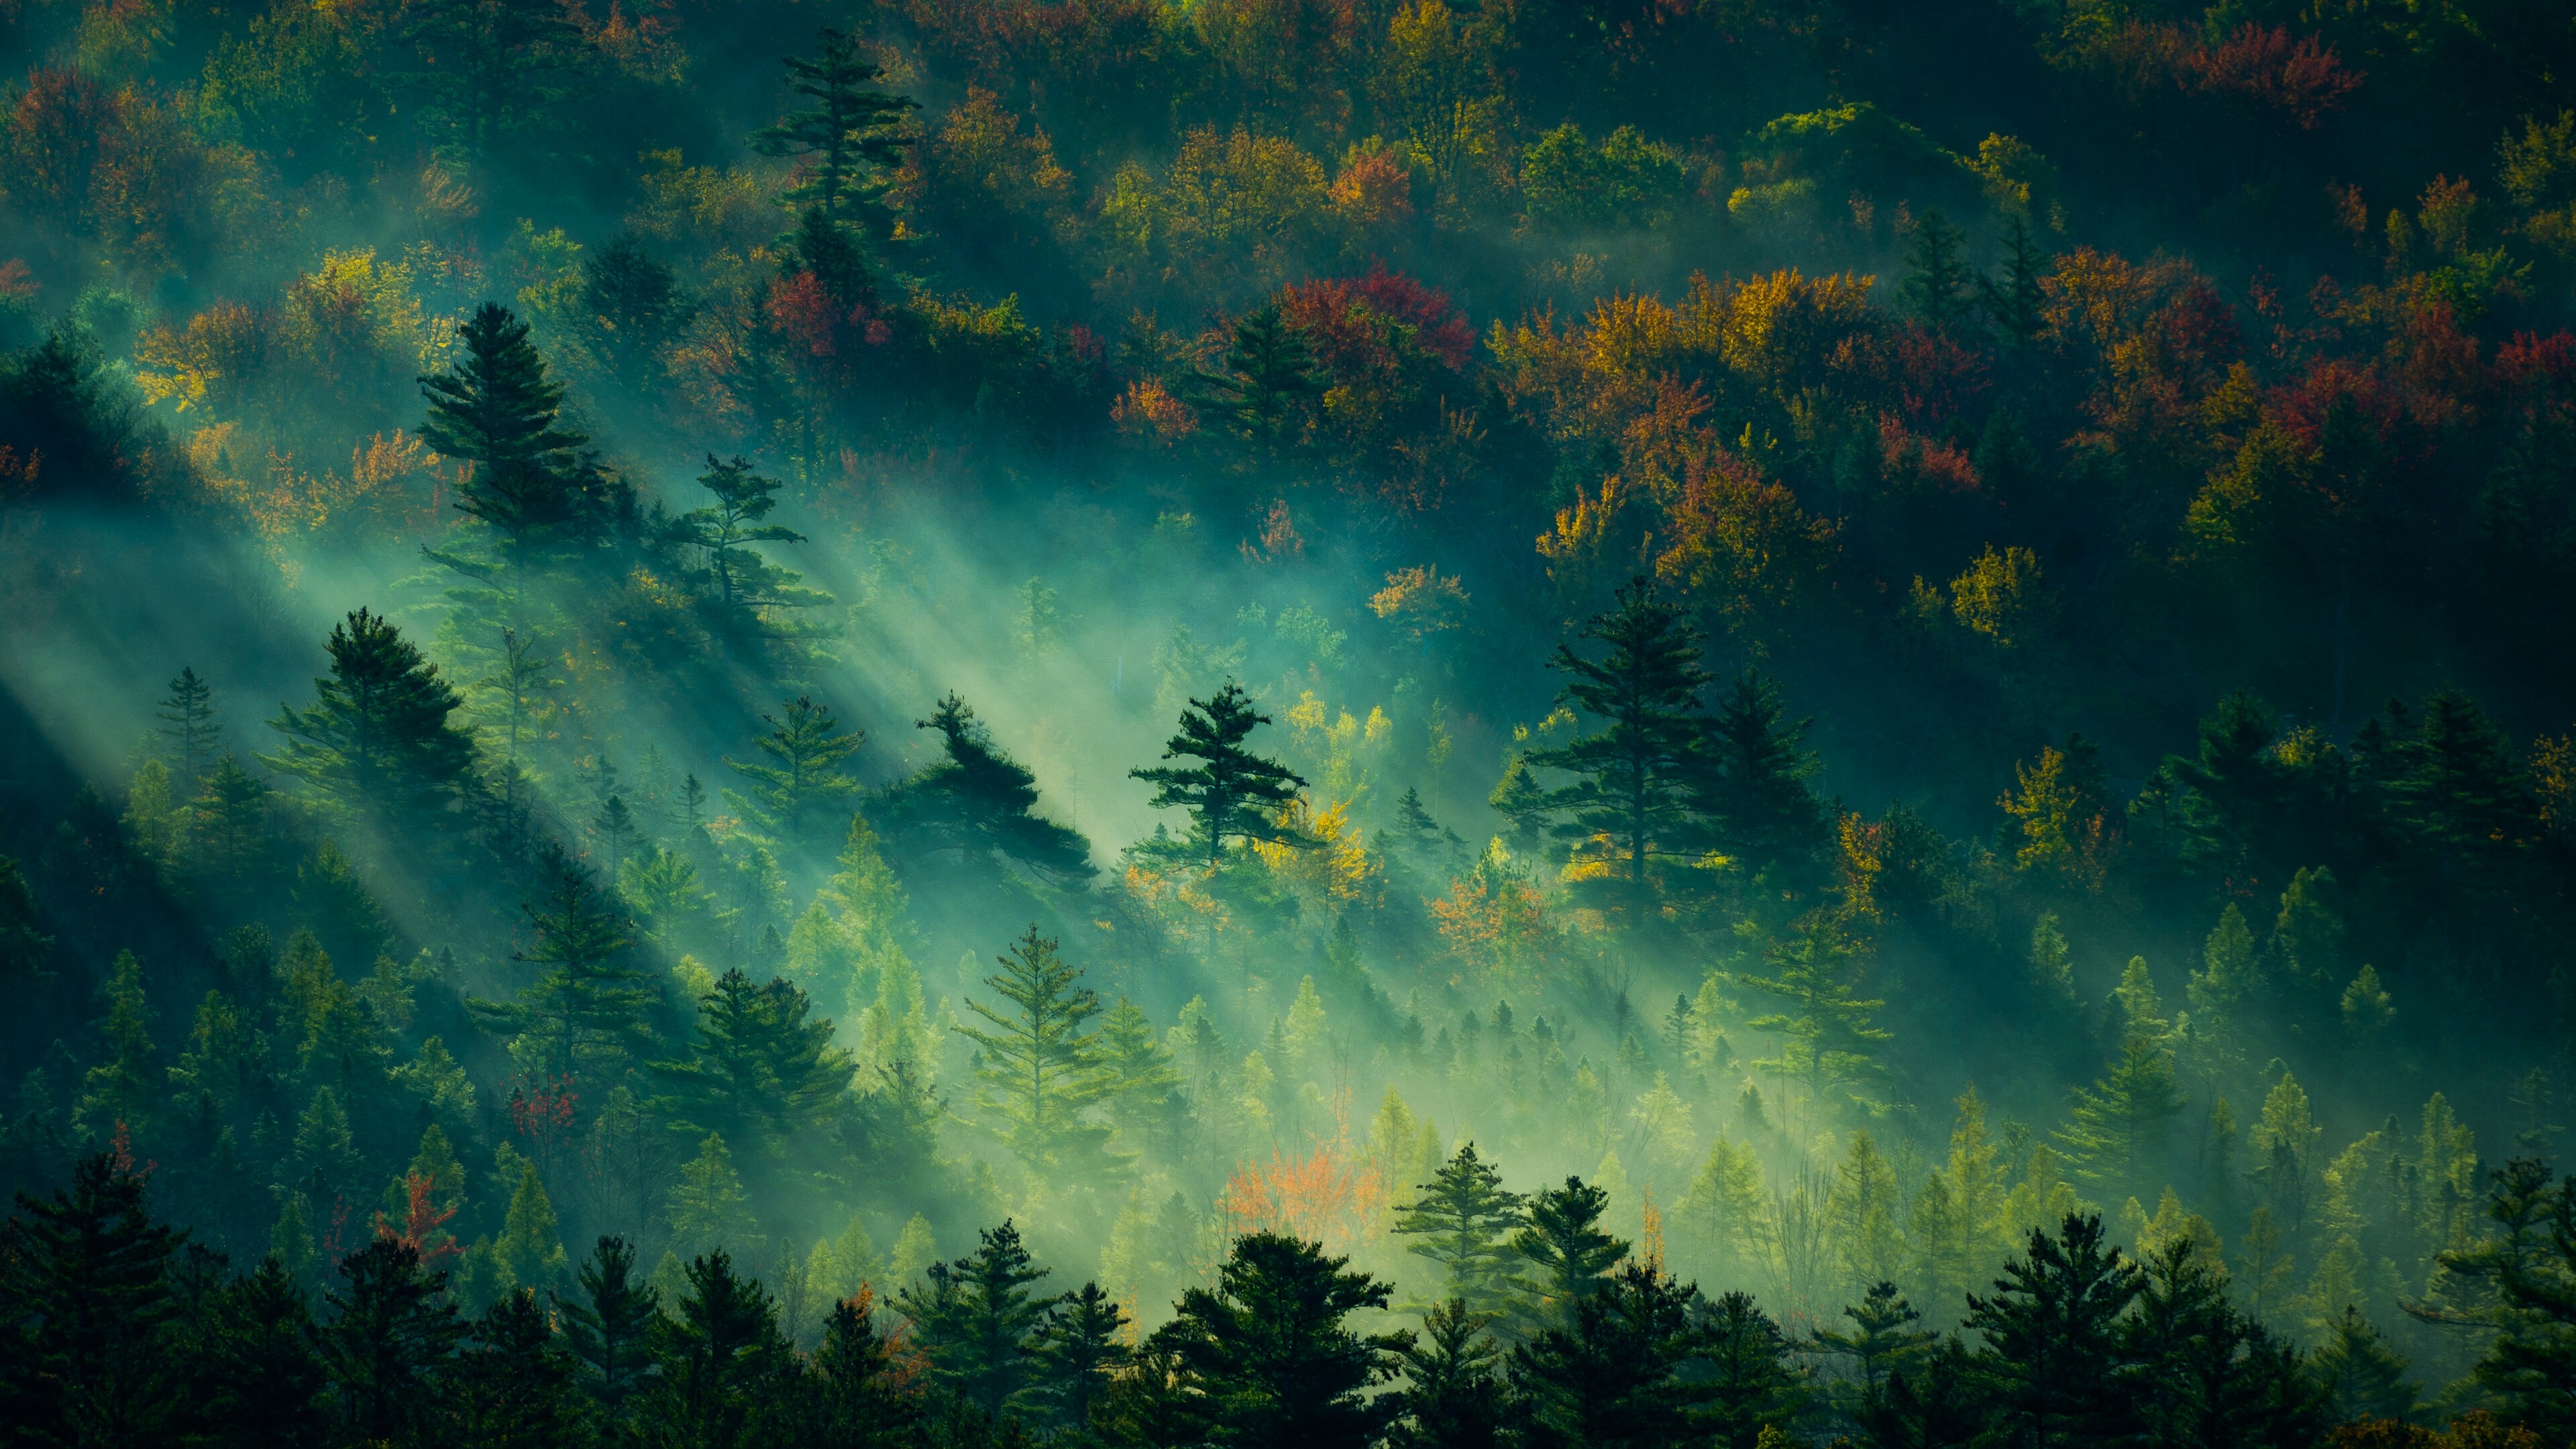 Autumn forest mystique, Foggy ambiance, Whispers of change, Nature's transition, 3840x2160 4K Desktop